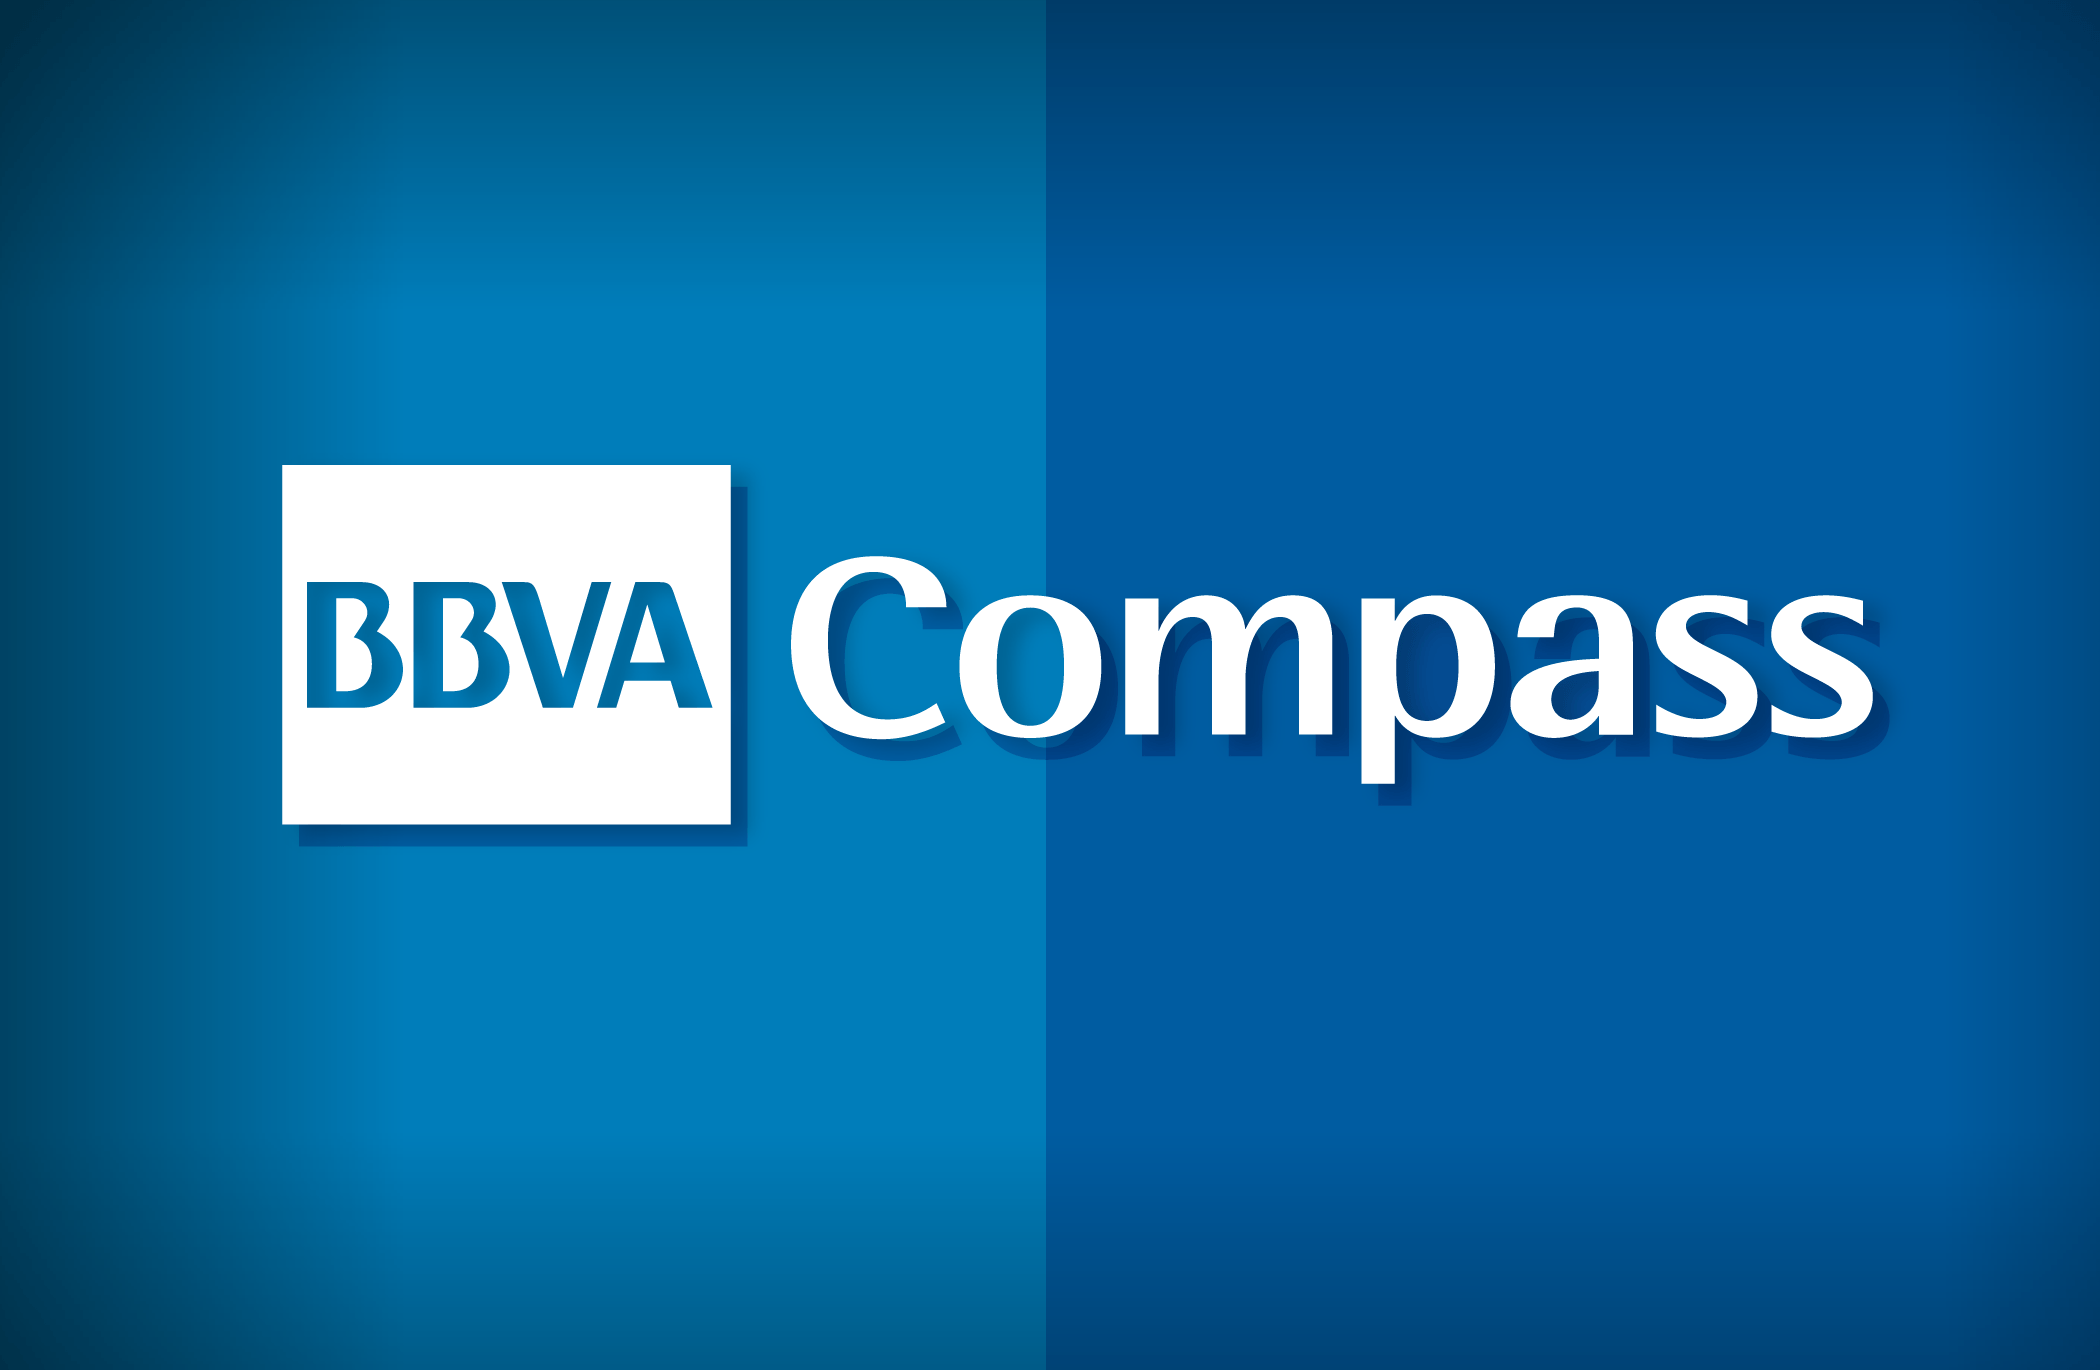 BBVA Compass Logo - BBVA Compass: The Best Regional Bank in the South & West | Time